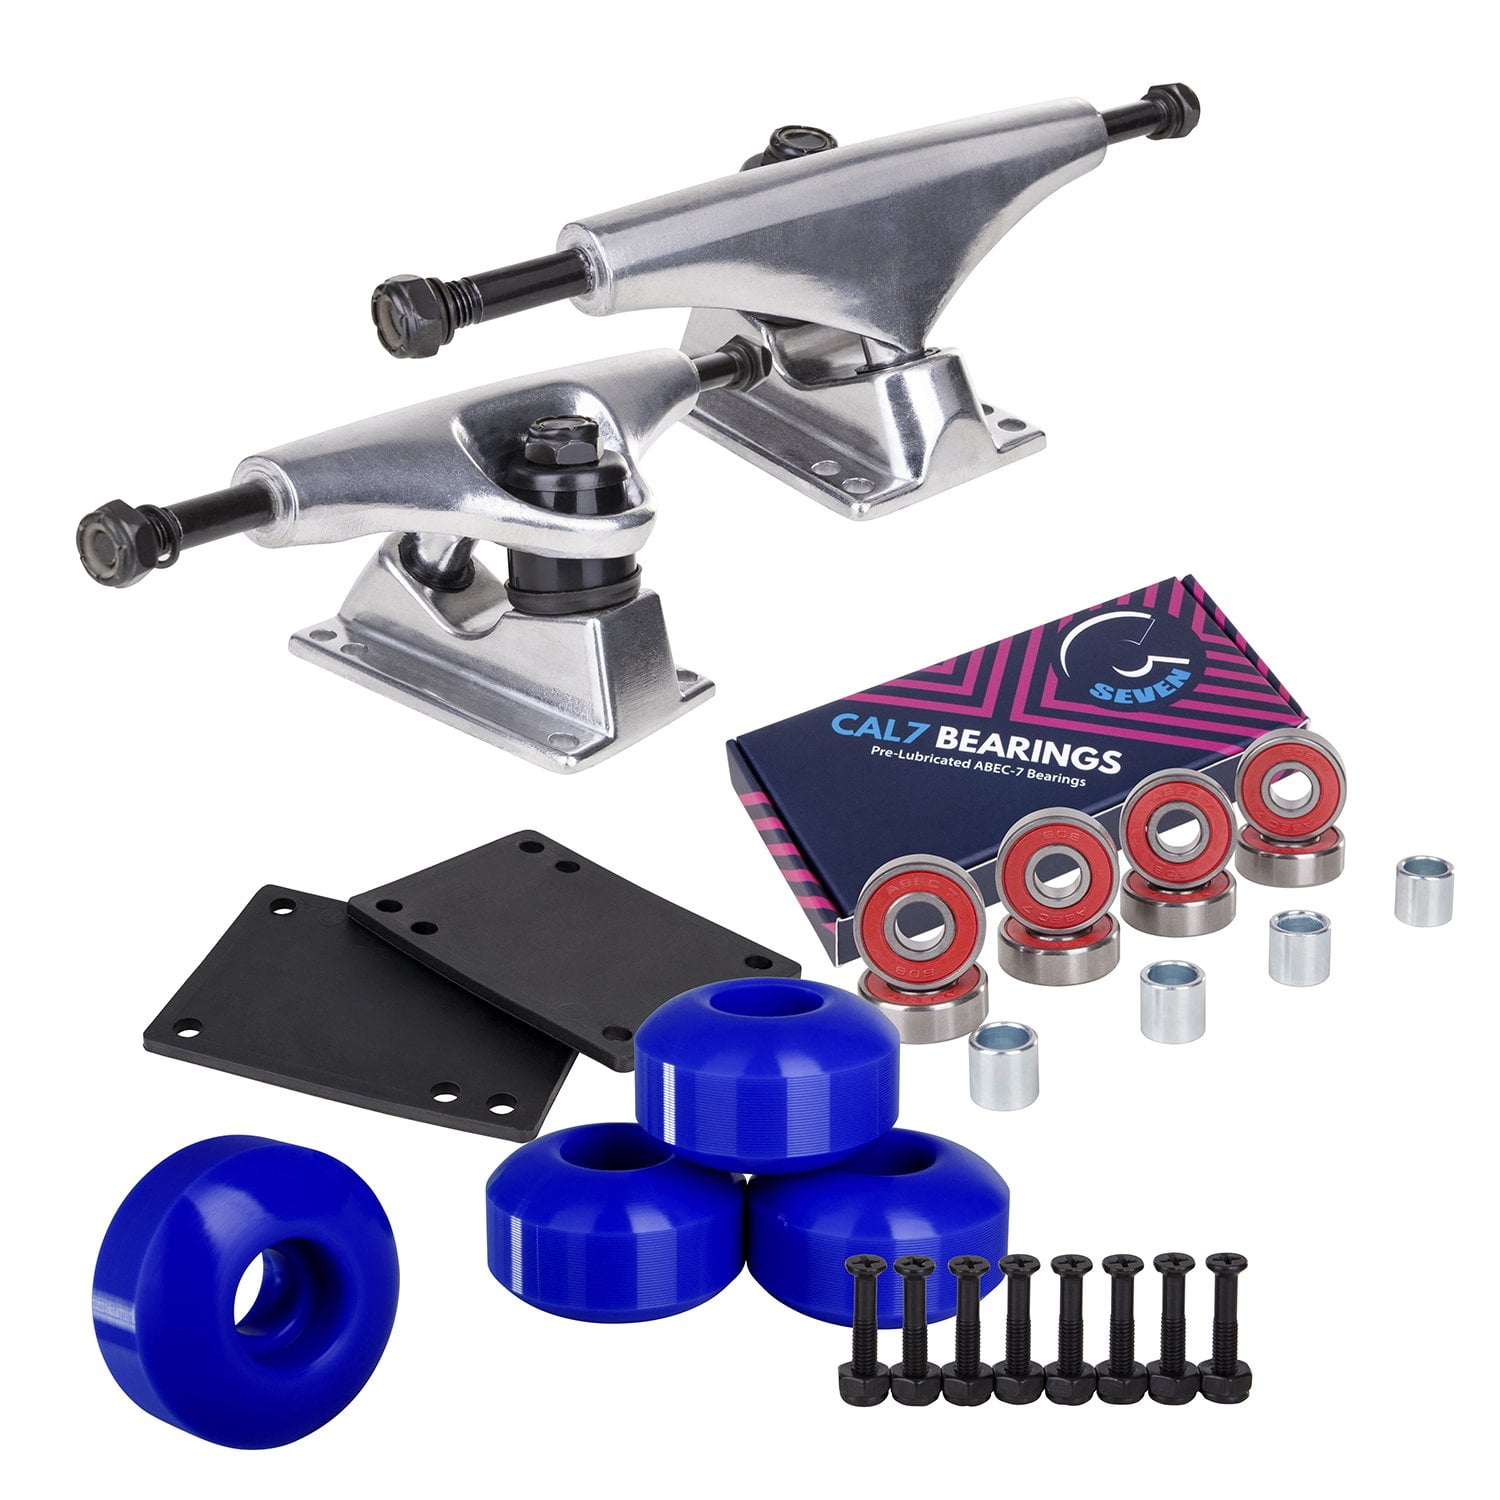 Independent 139 Stage 11 Skateboard Trucks Cal 7 52mm Graphic Wheels Combo 